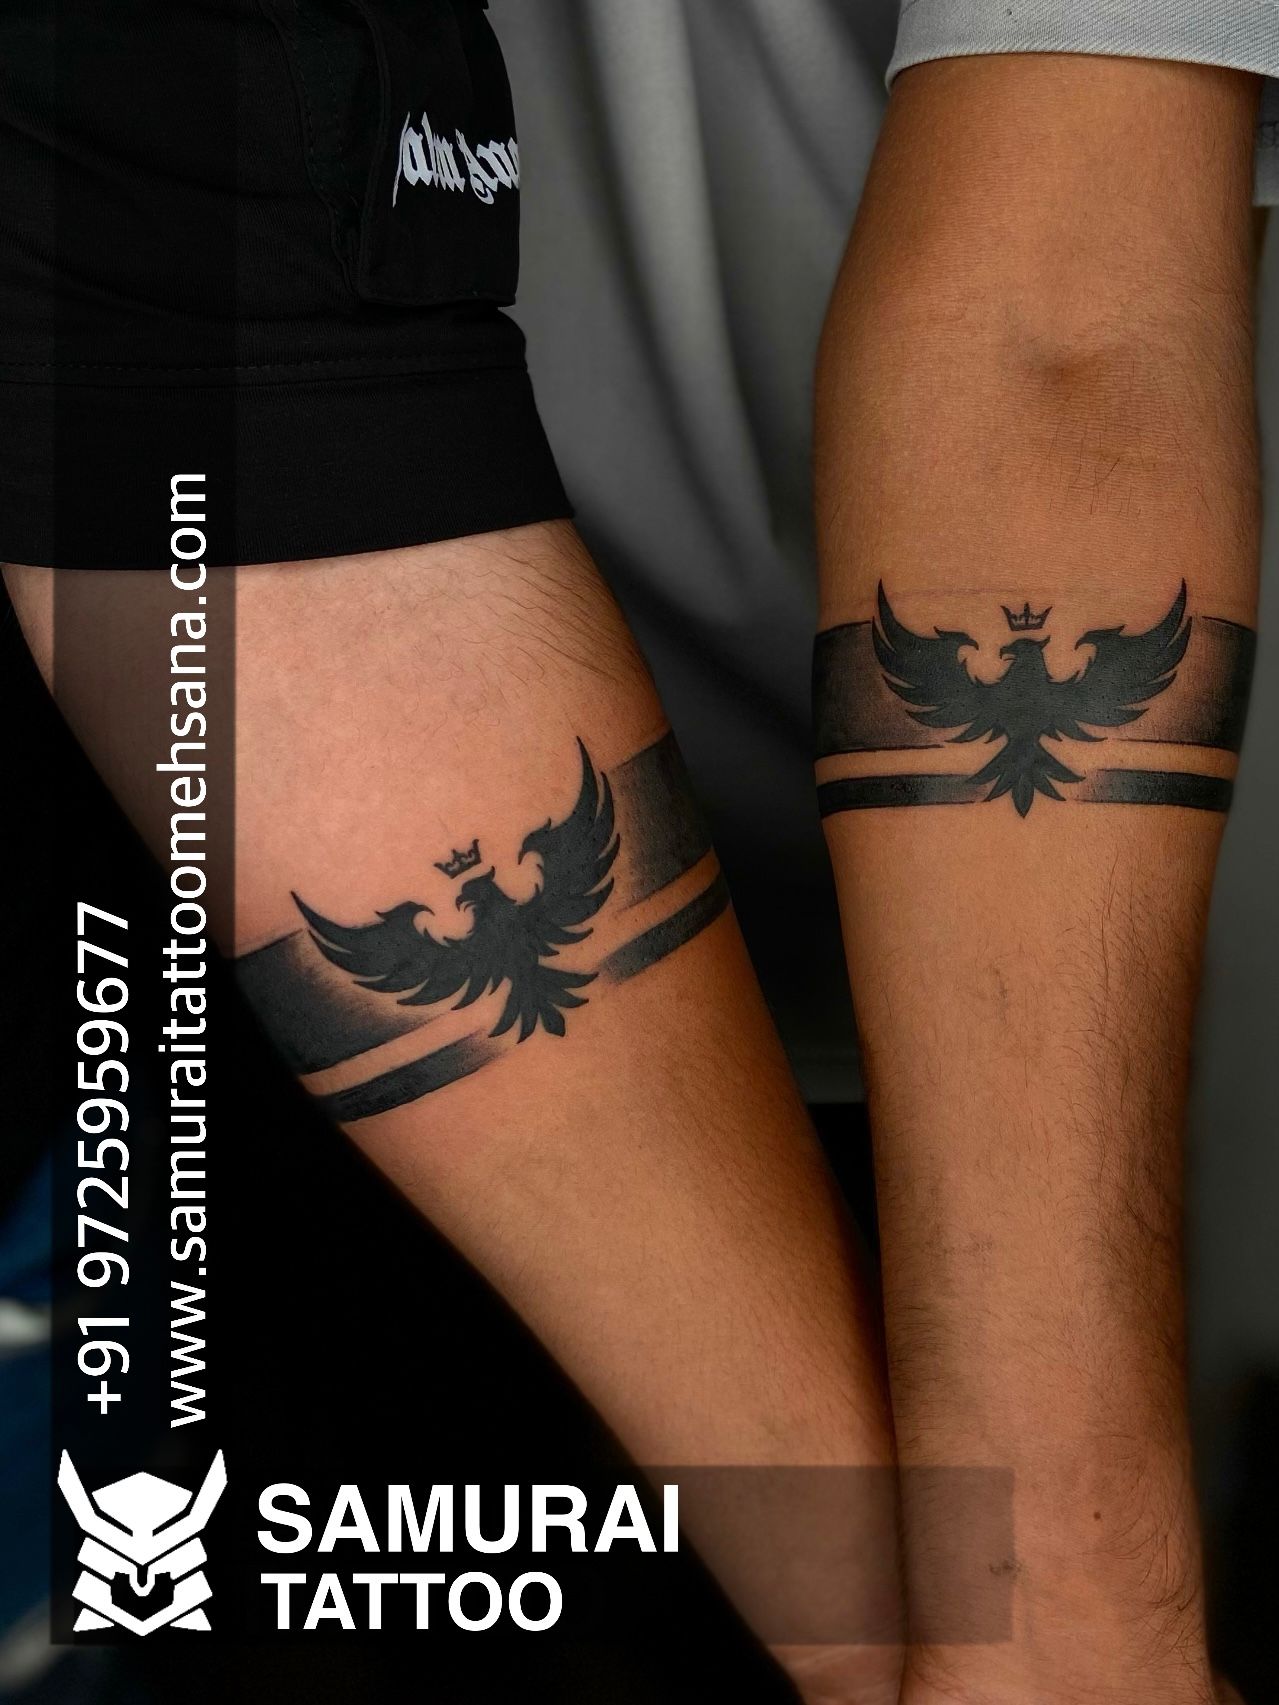 Arm band tattoo for men and women - YouTube